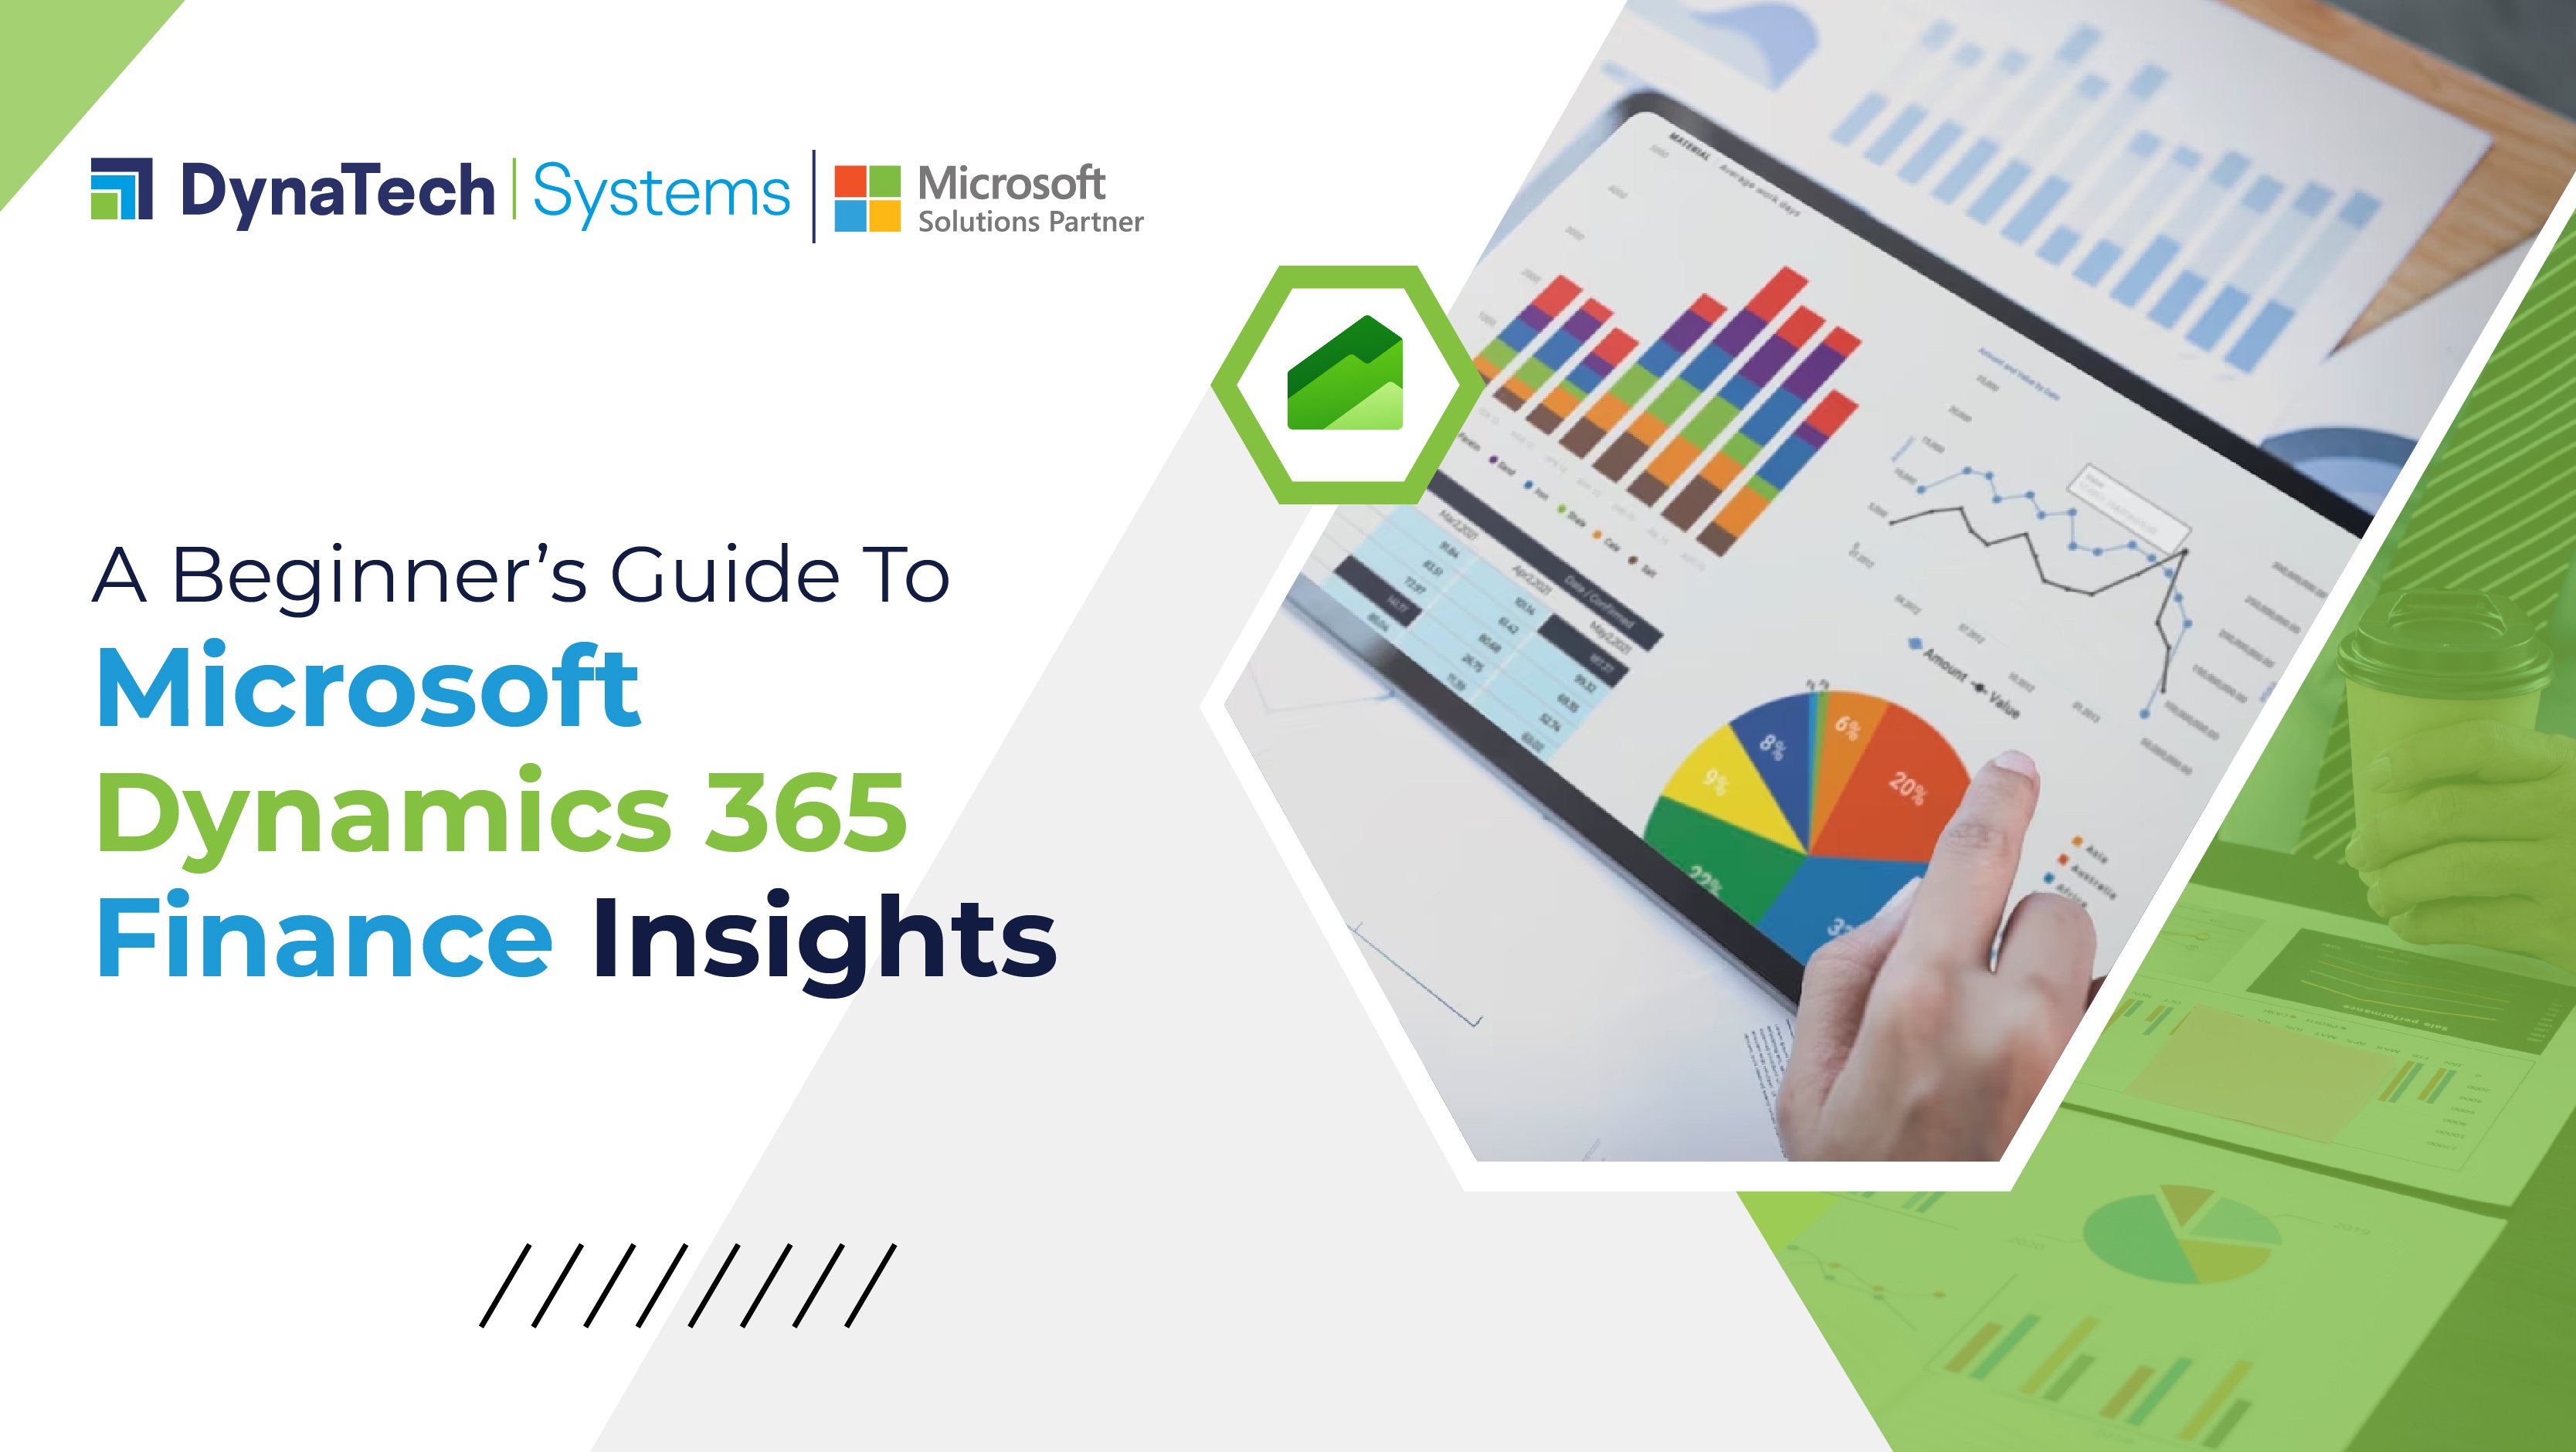 A Beginner’s Guide To Microsoft Dynamics 365 Finance Insights